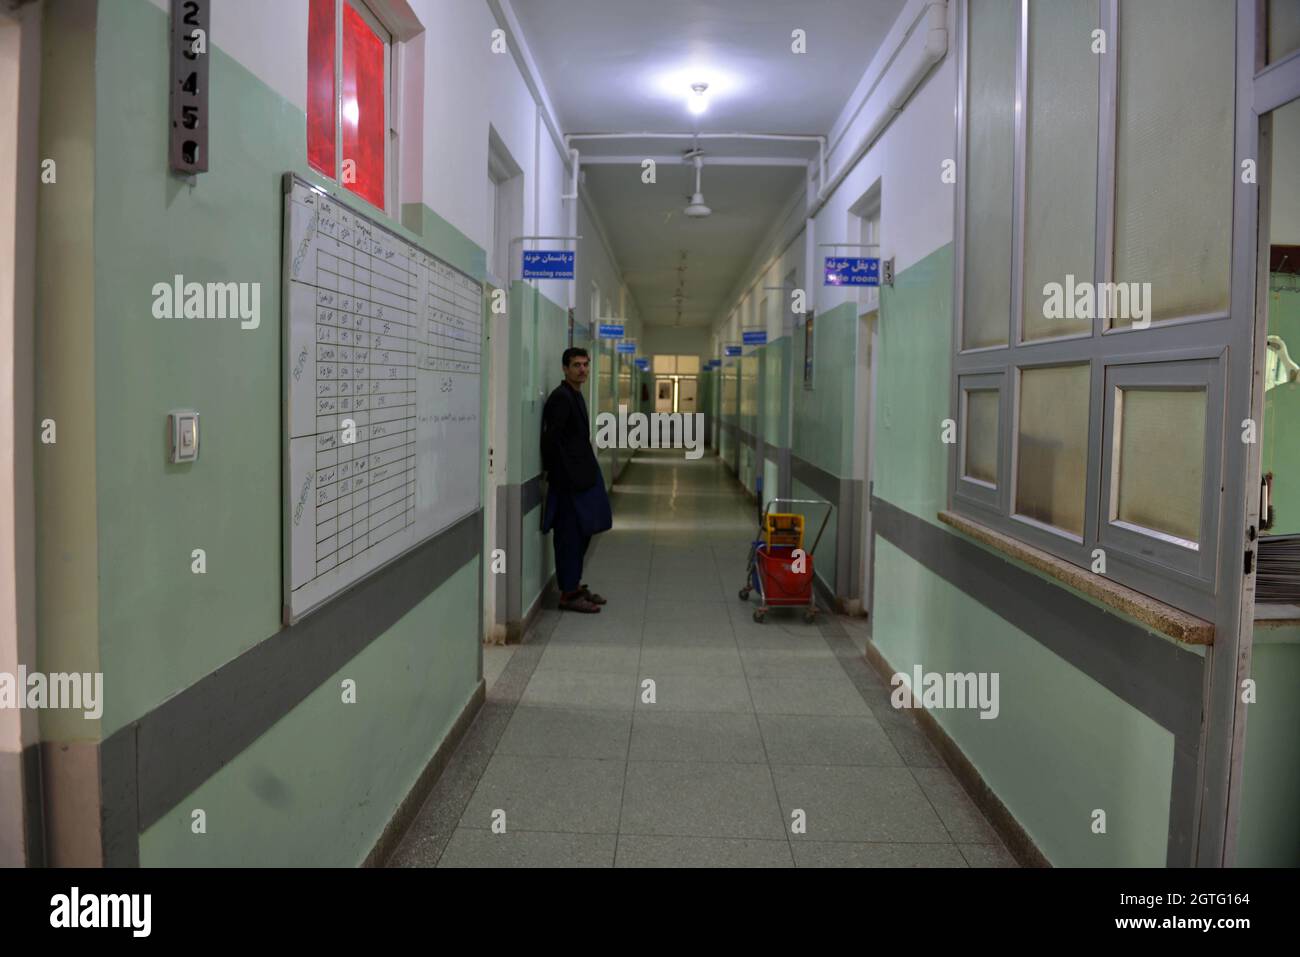 Kandahar. 30th Sep, 2021. Photo taken on Sept. 30, 2021 shows a hallway of the Mirwais Regional Hospital in Kandahar city, southern Afghanistan. TO GO WITH 'Feature: China-built hospital gives patients hope amid Afghanistan's strained health system' Credit: Sanaullah Seiam/Xinhua/Alamy Live News Stock Photo